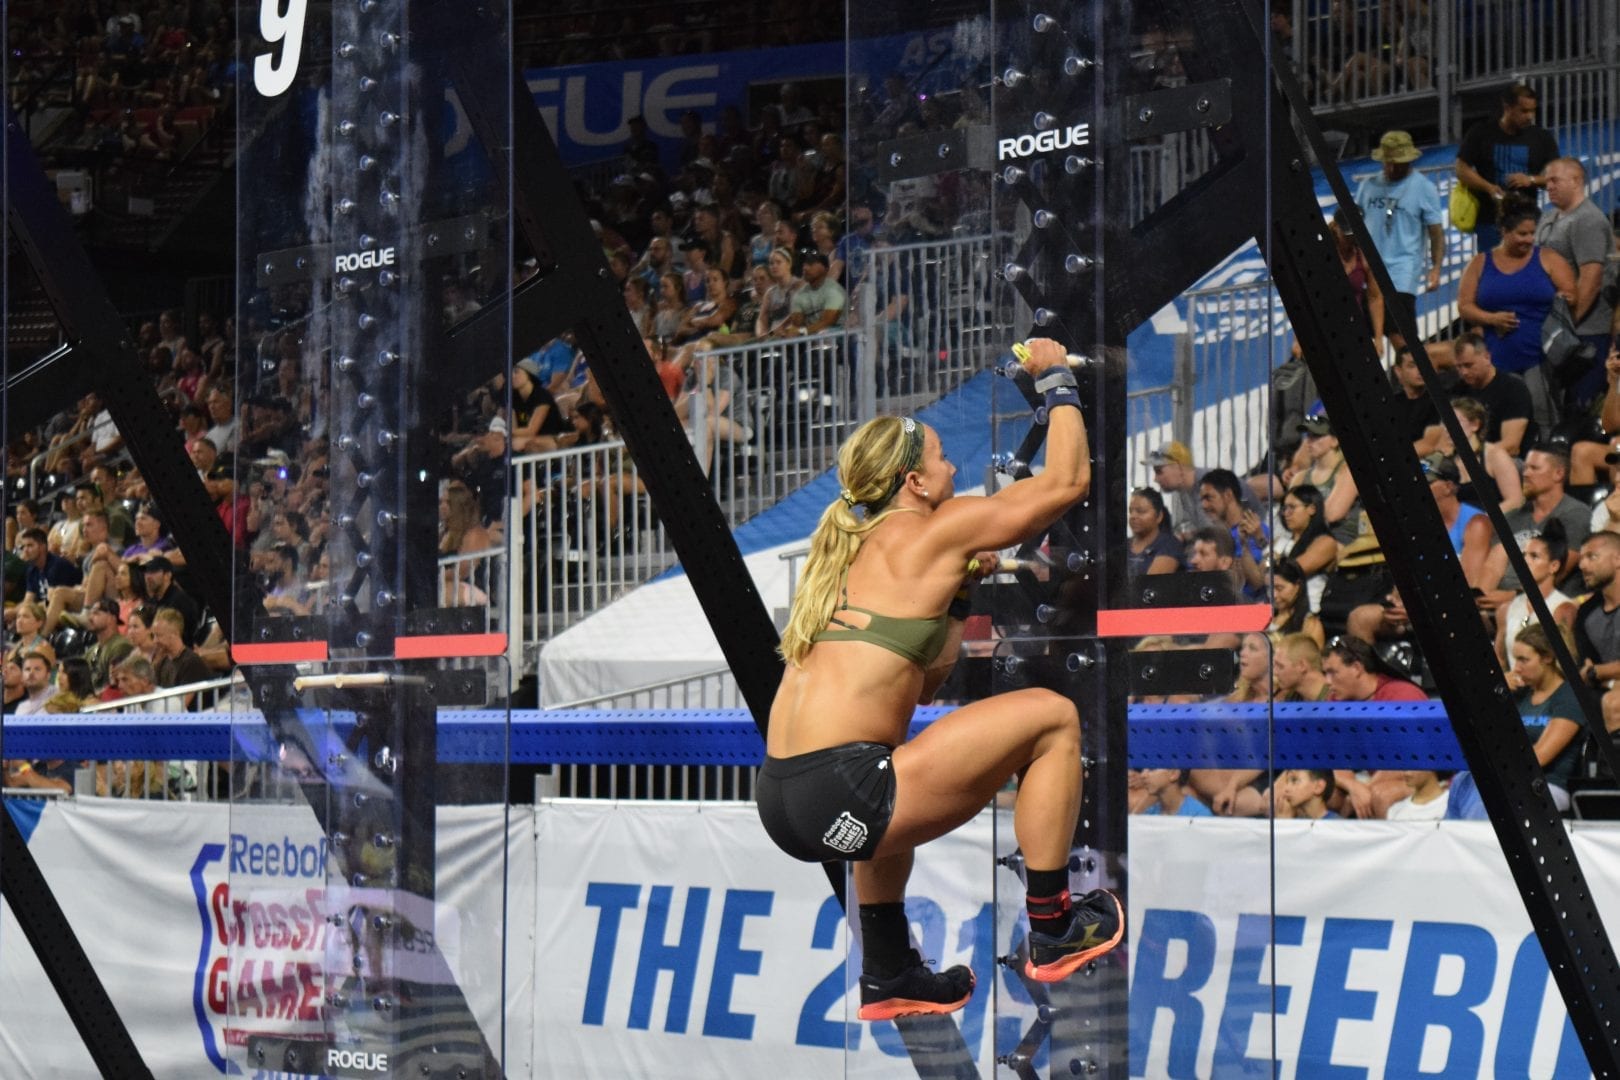 Amanda Barnhart climbs a pegboard in the Coliseum at the 2019 CrossFit Games